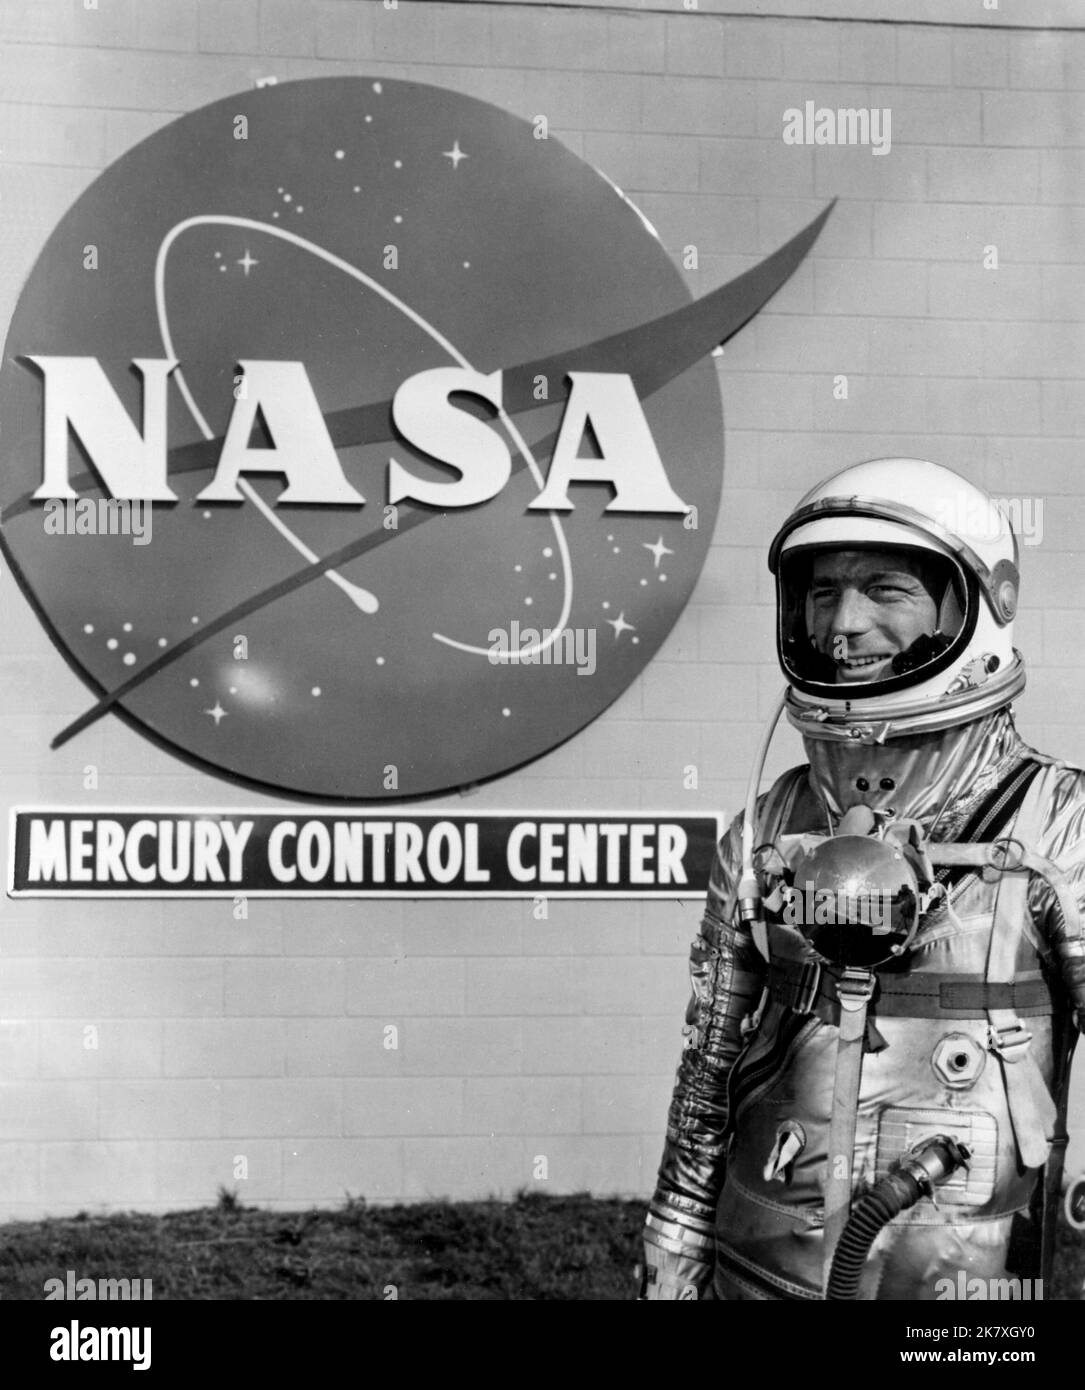 Astronaut Scott Carpenter stands in front of the Mercury Control Center at Cape Canaveral. Carpenter was the pilot for the Mercury-Atlas 7 mission aboard Aurora 7, which launched May 24, 1962.  Image credit: NASA Stock Photo